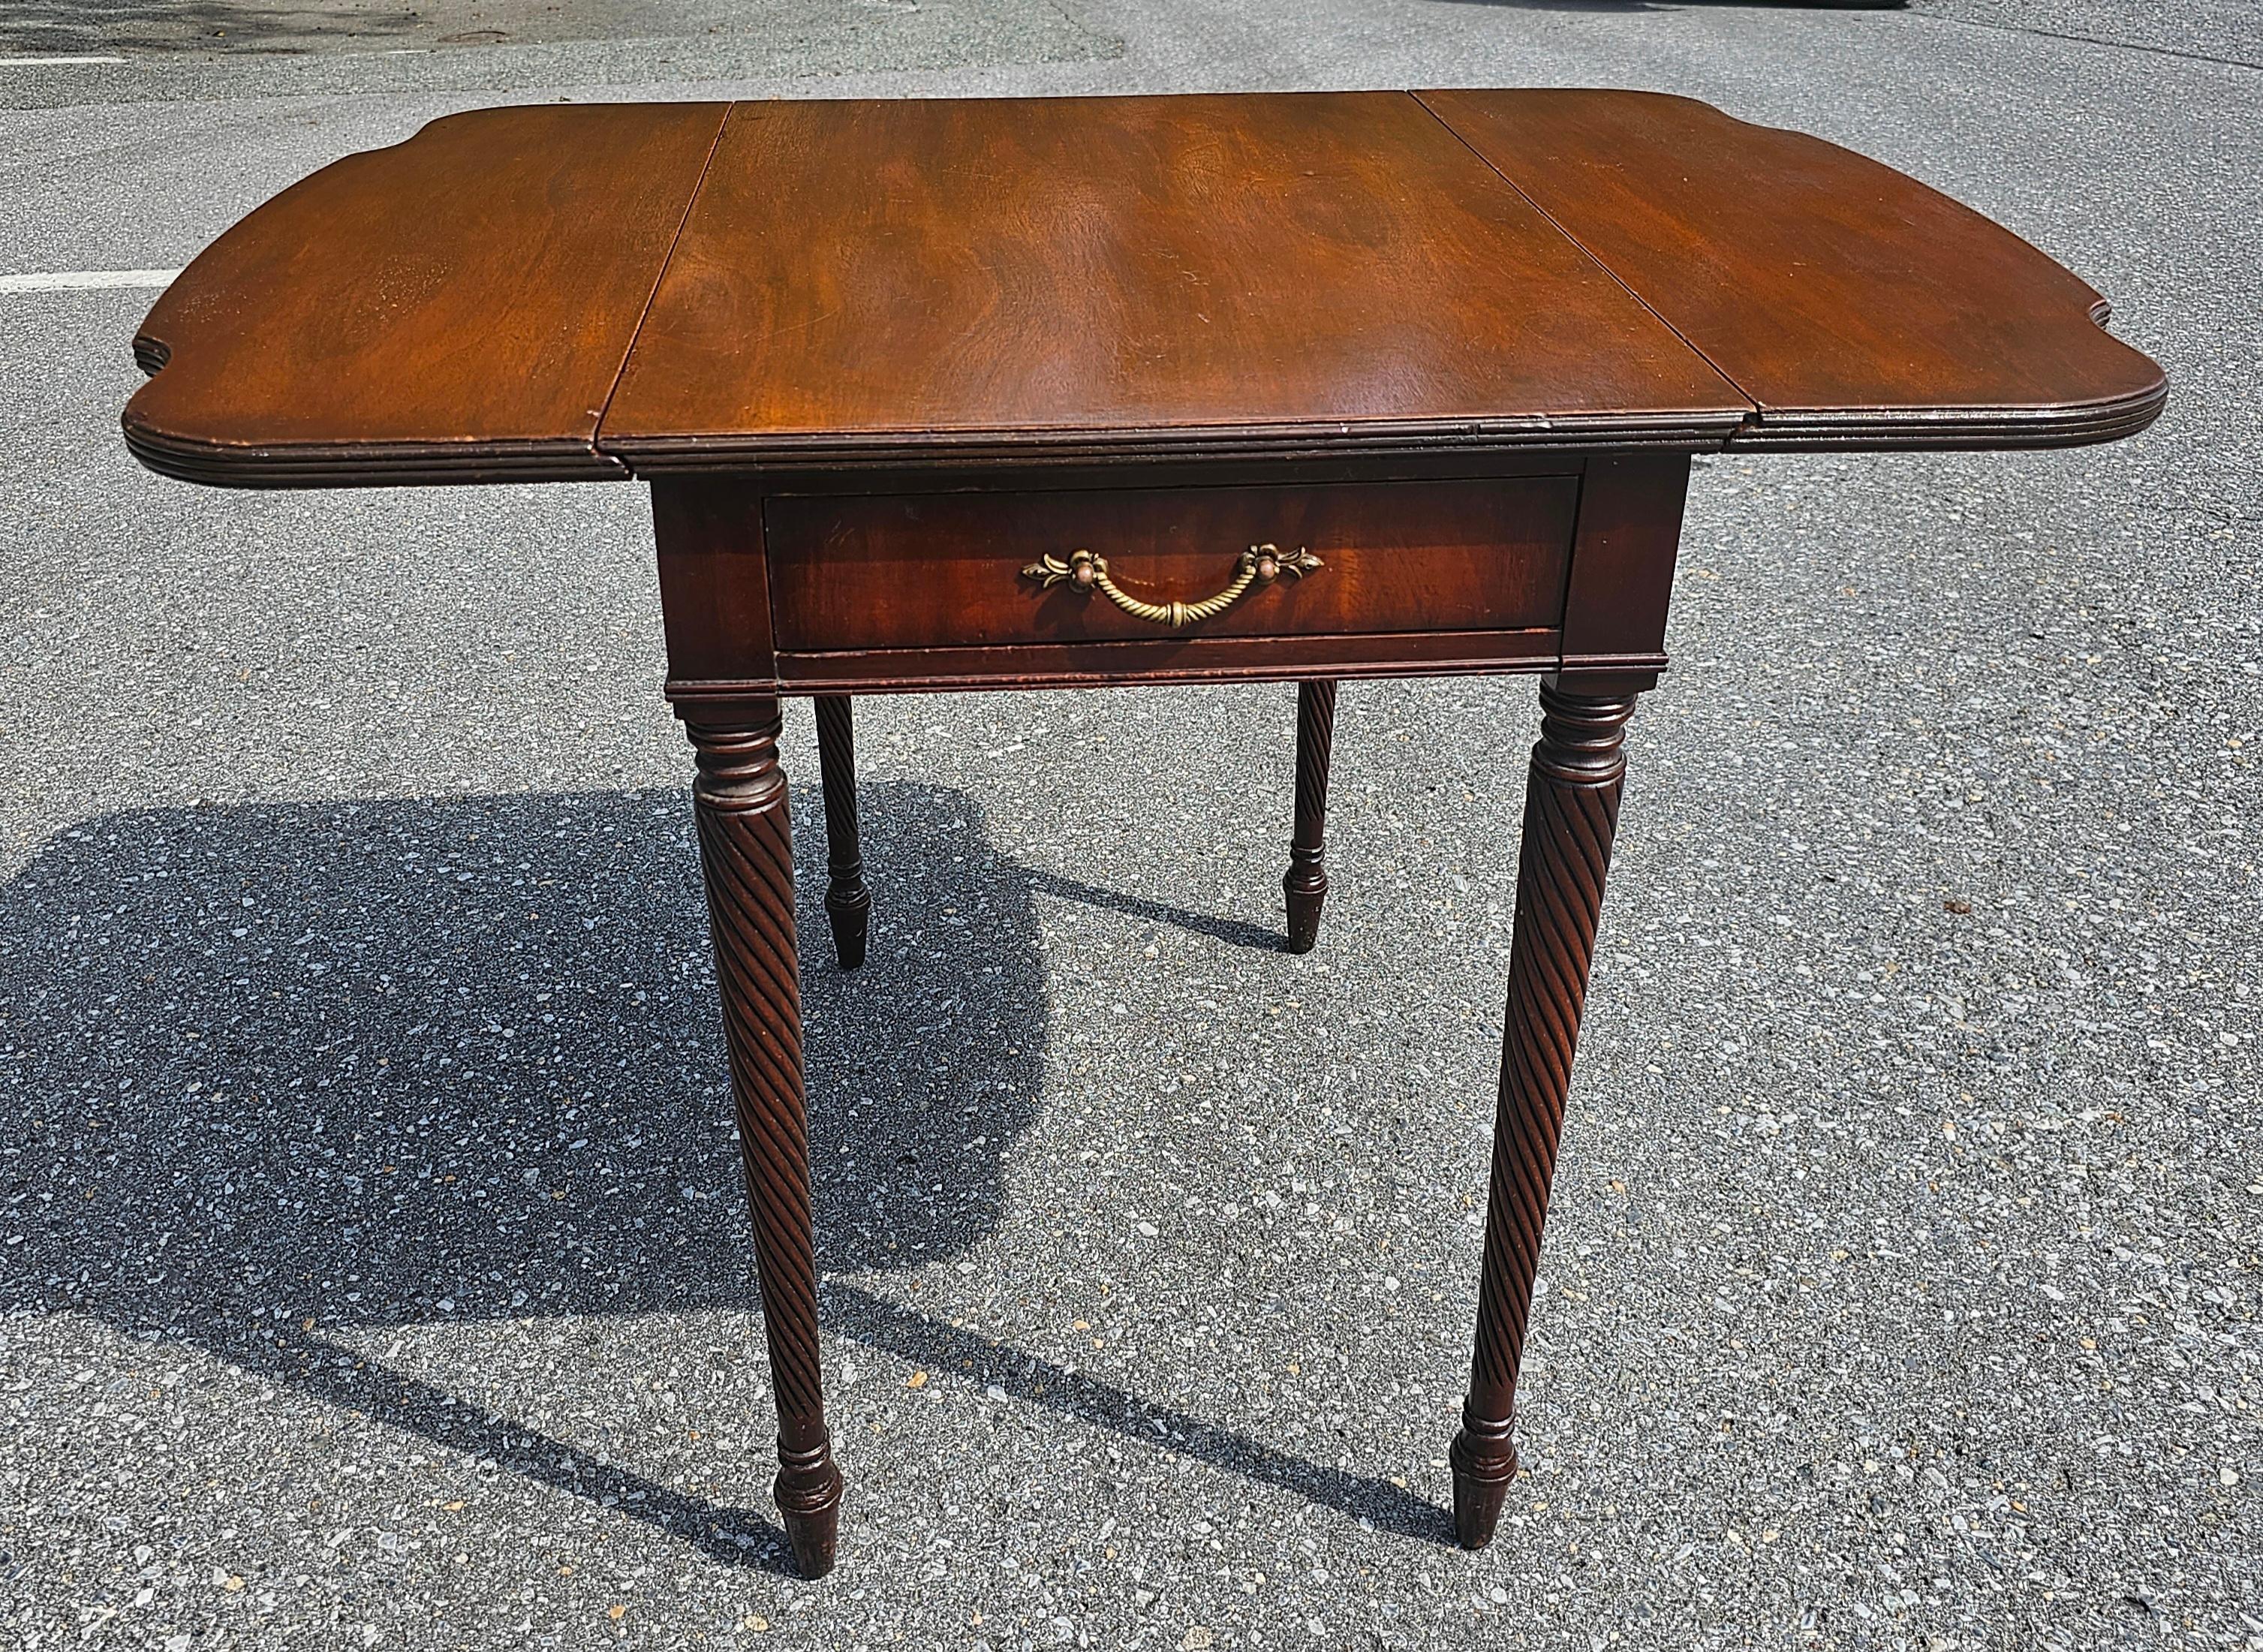 Early 20th C. Imperial Grand Rapids Mid Century Mahogany Pembroke Table In Good Condition For Sale In Germantown, MD